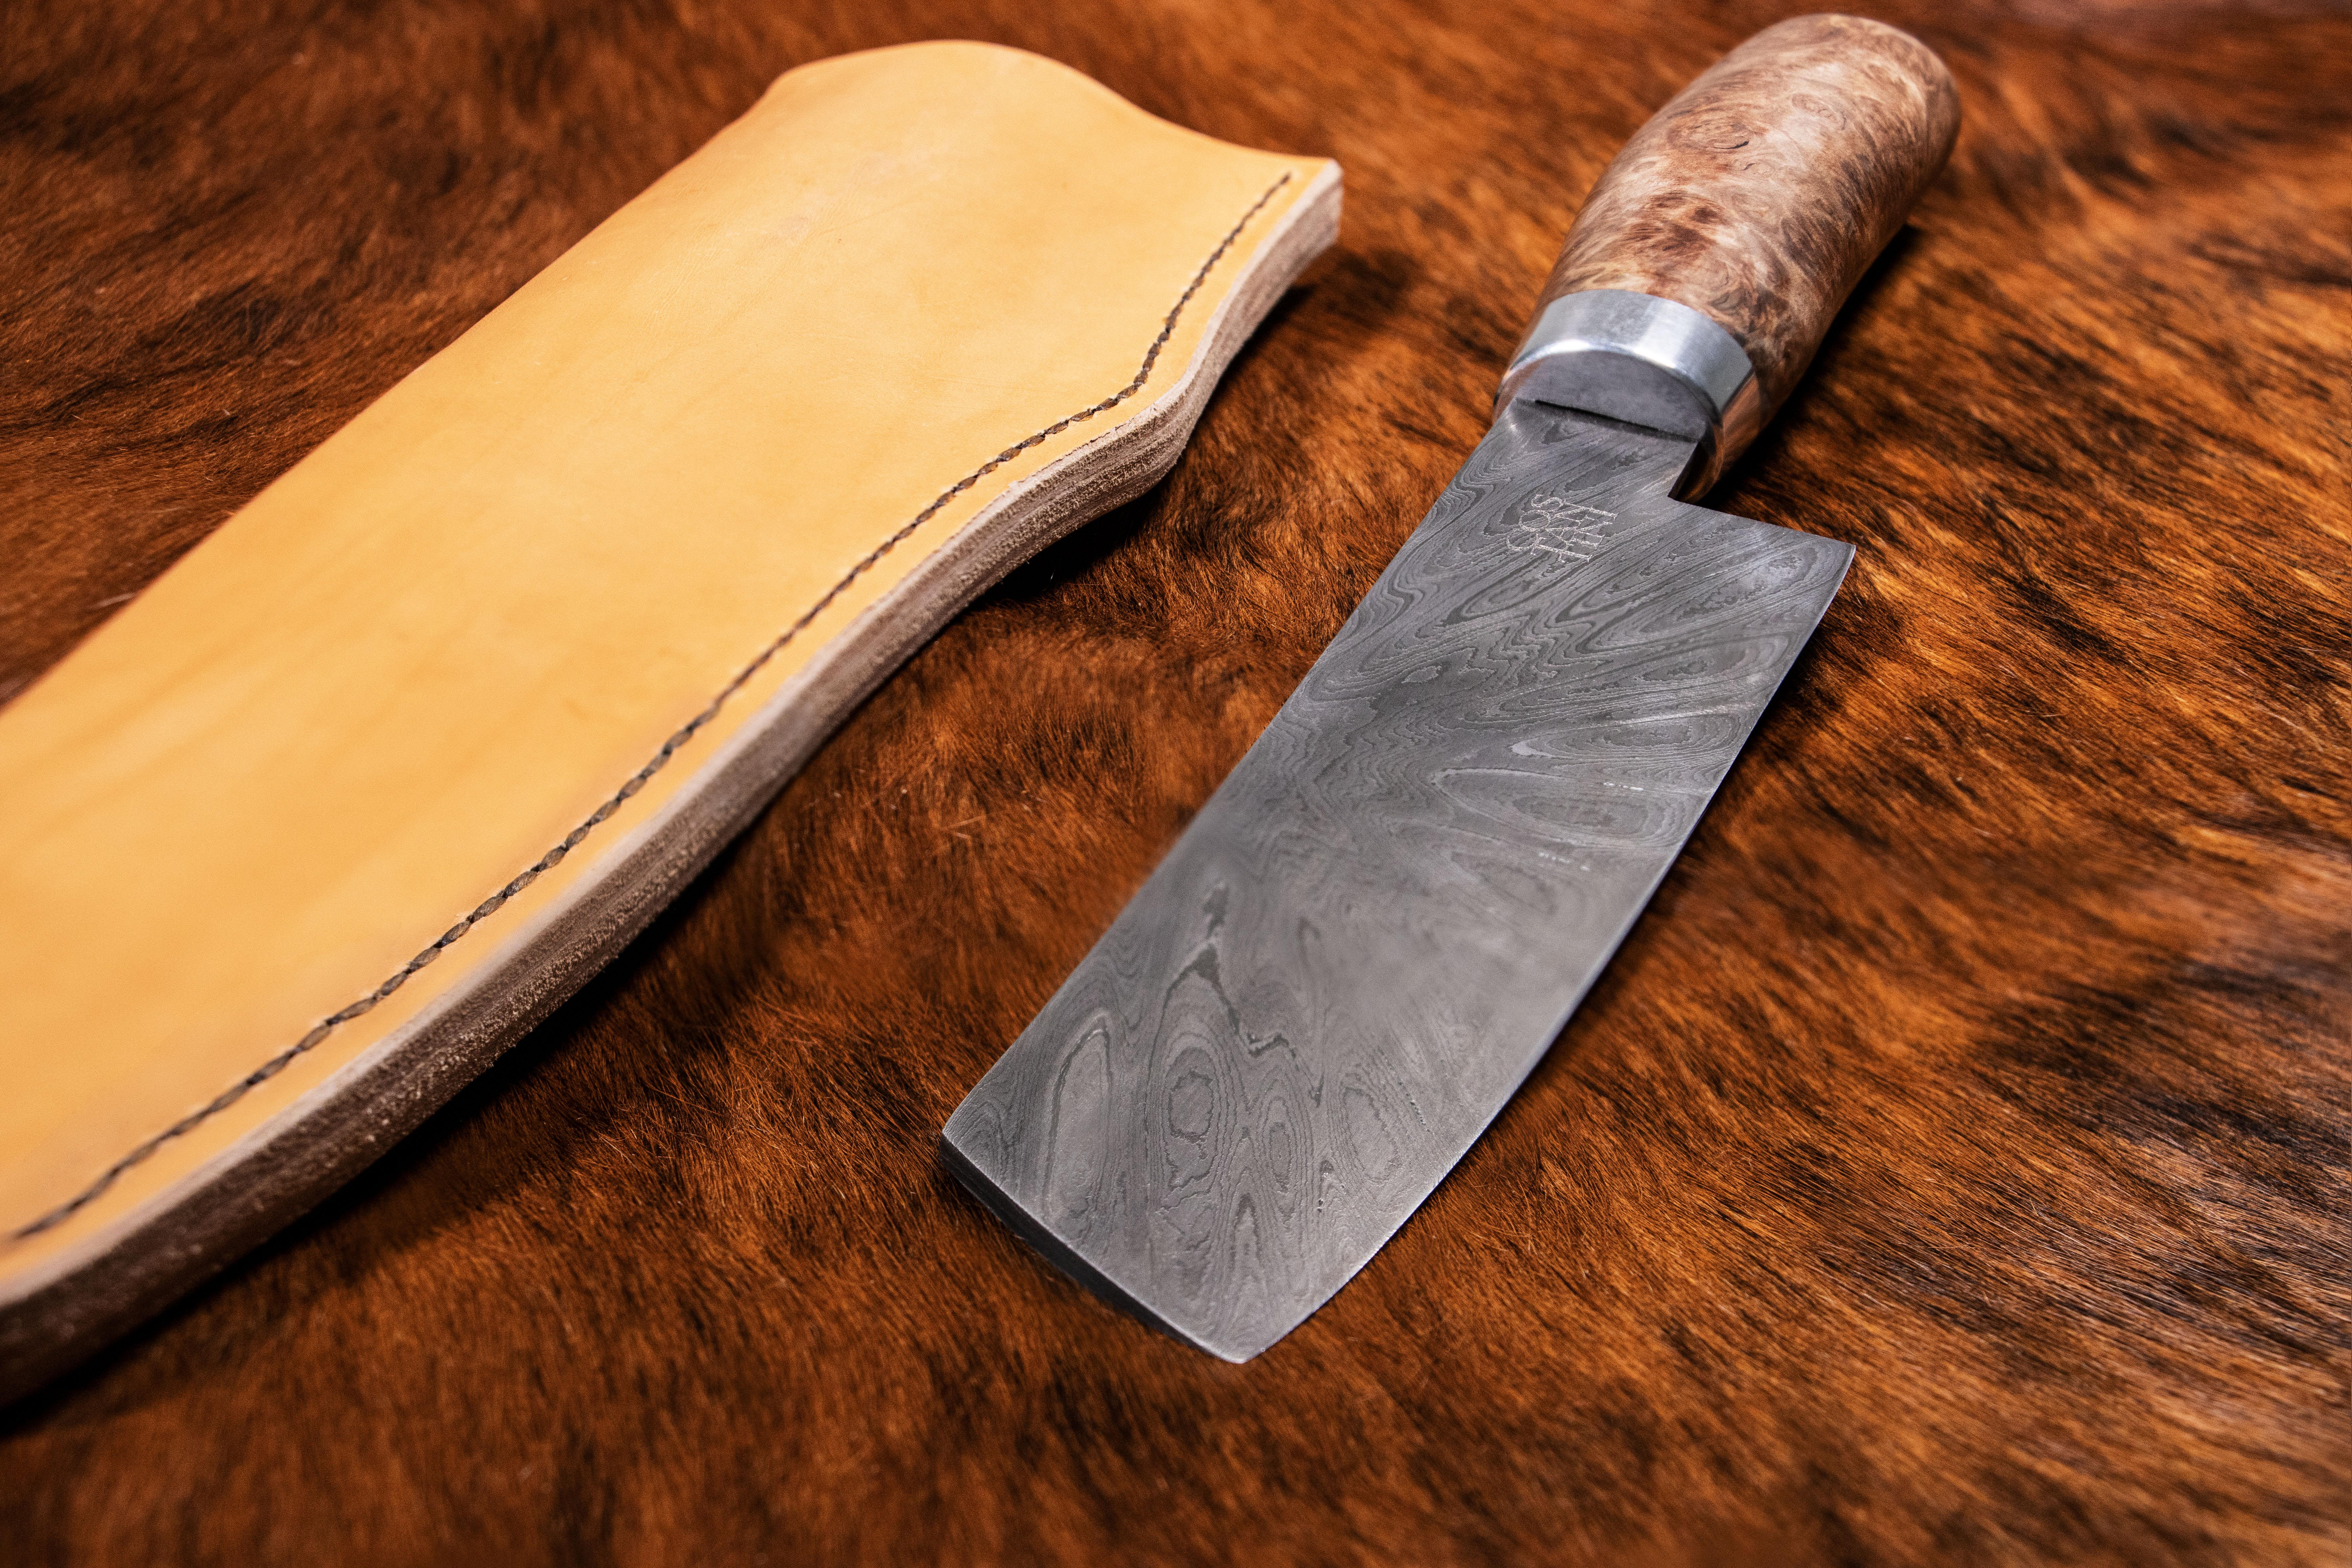 Customizable forged culinary Damascus Steel Knife from Costantini Design.

This handmade knife is available as shown or with a San Mai blade, and the handle is available in various woods, inquire for details.

Measurments are 11.5